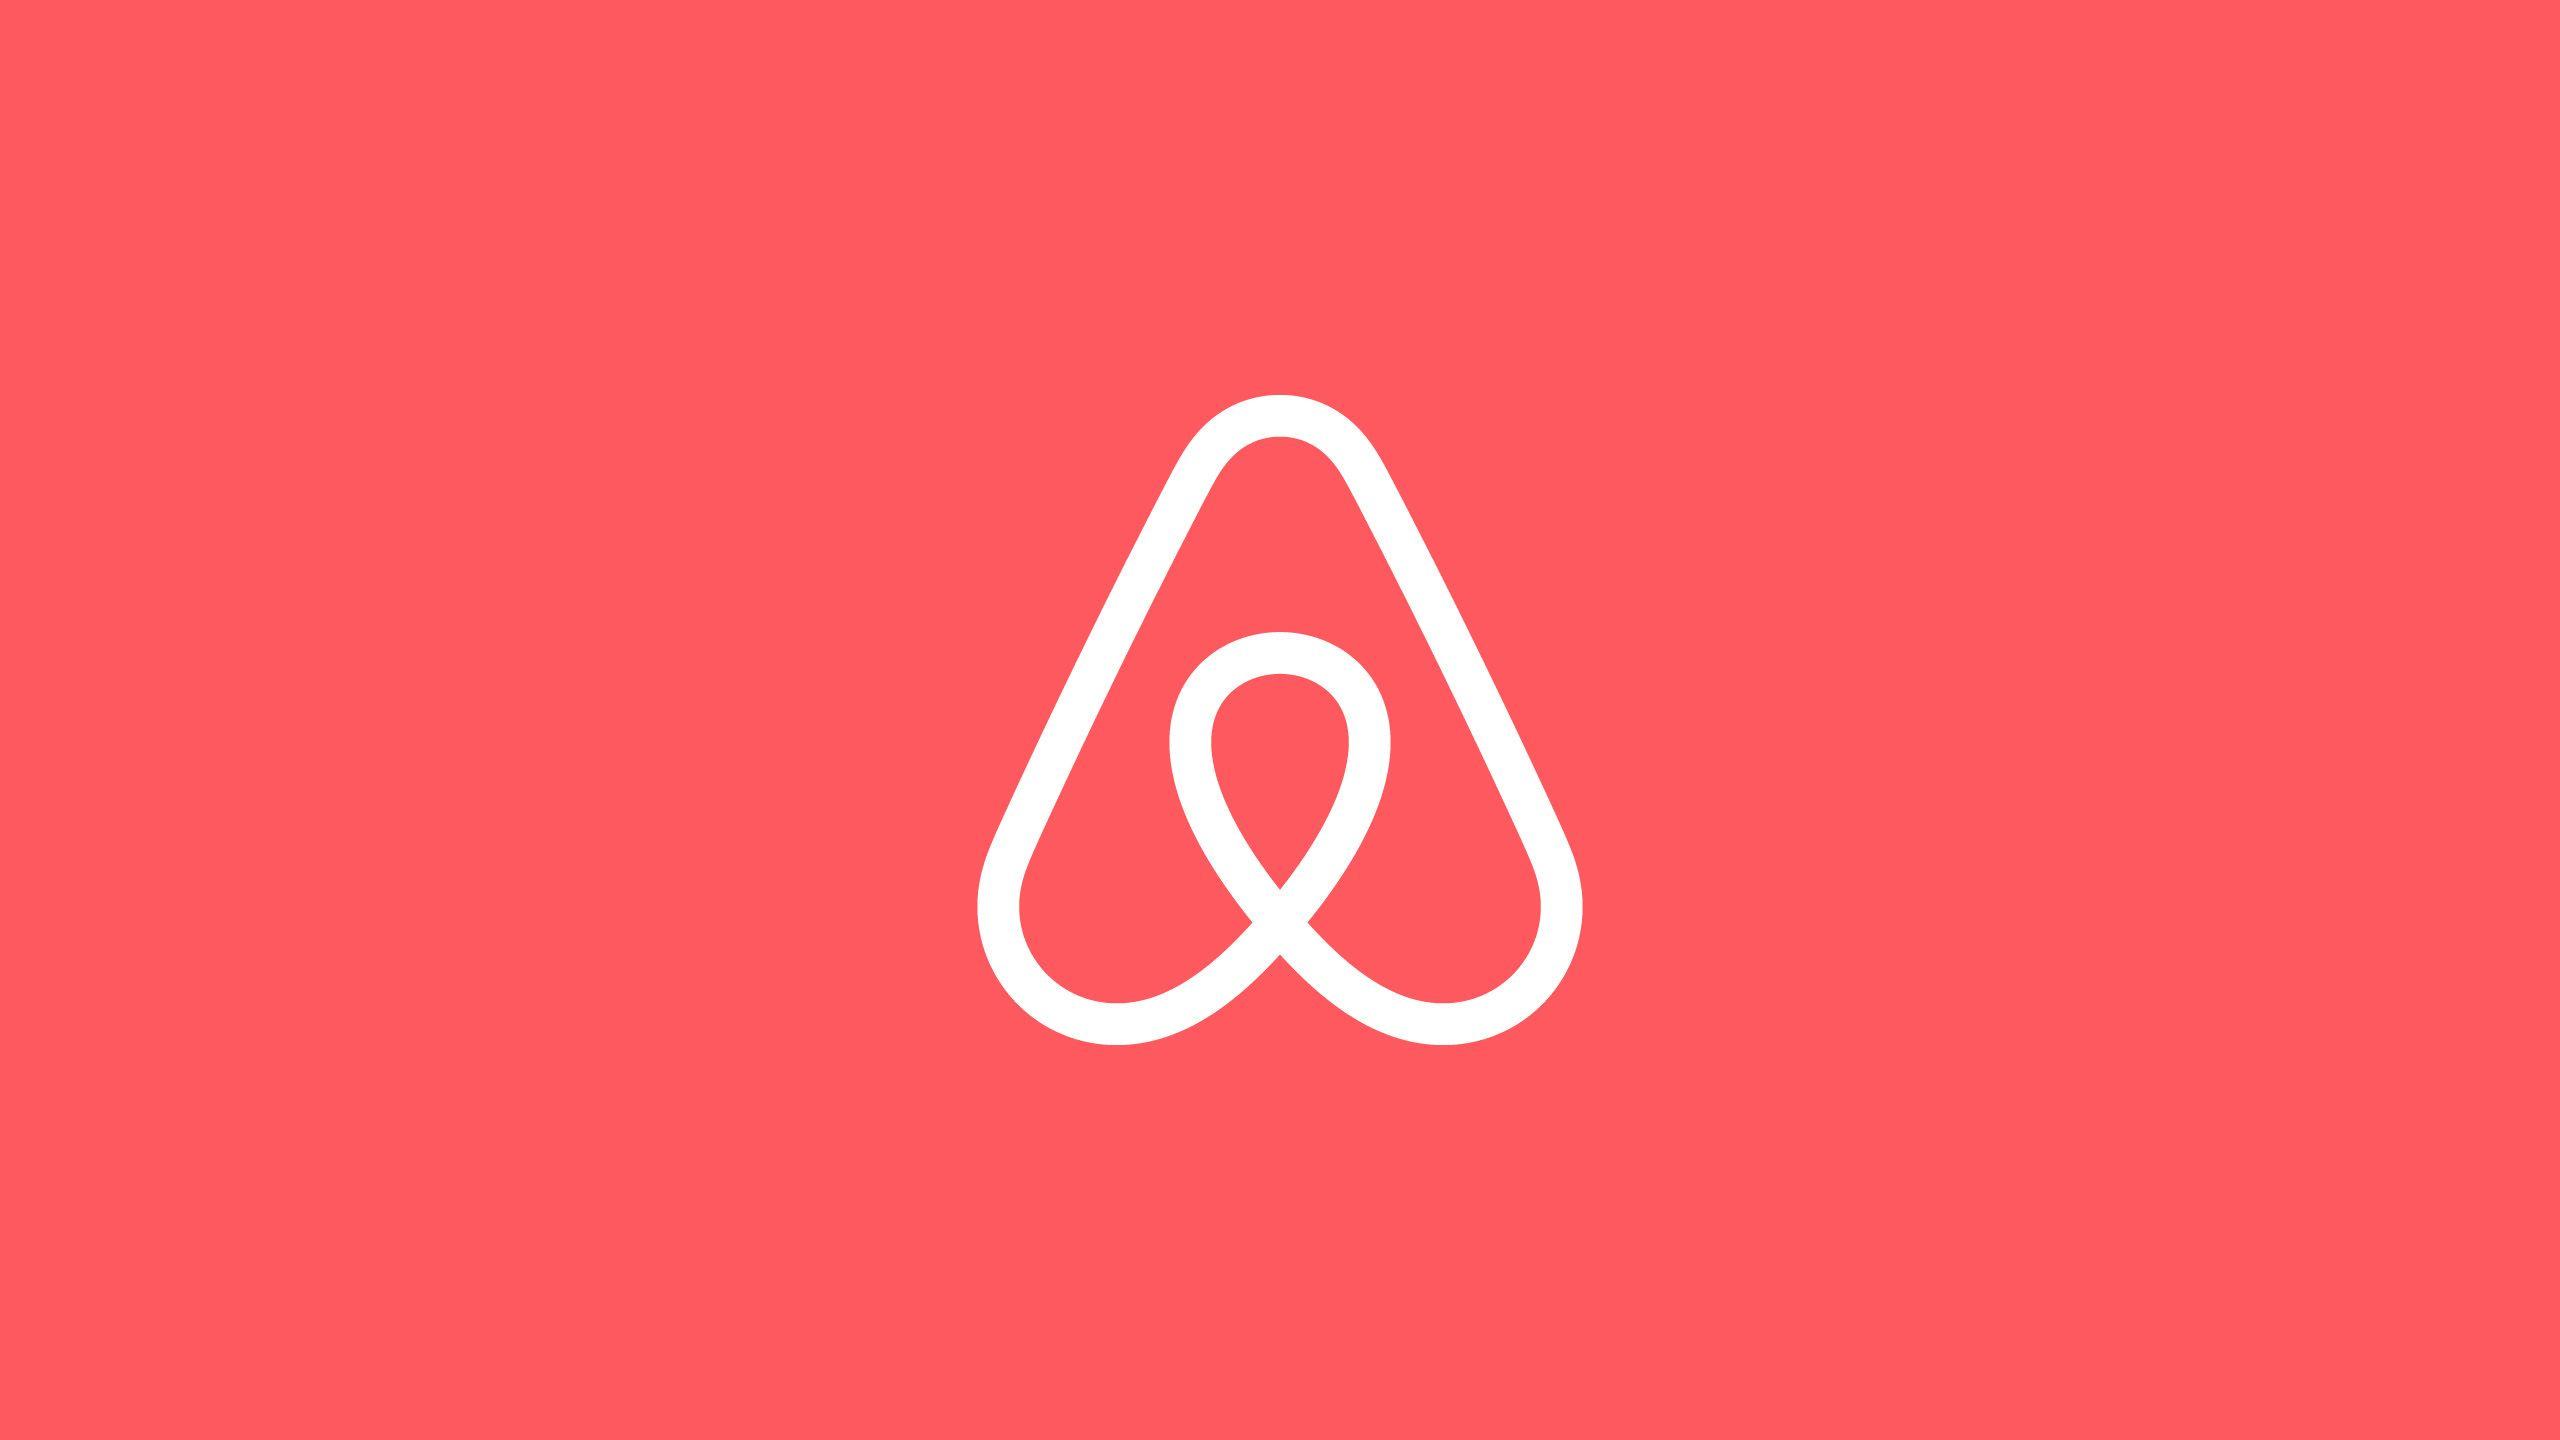 Airbnb Logo - Top designers react to Airbnb's controversial new logo | VentureBeat